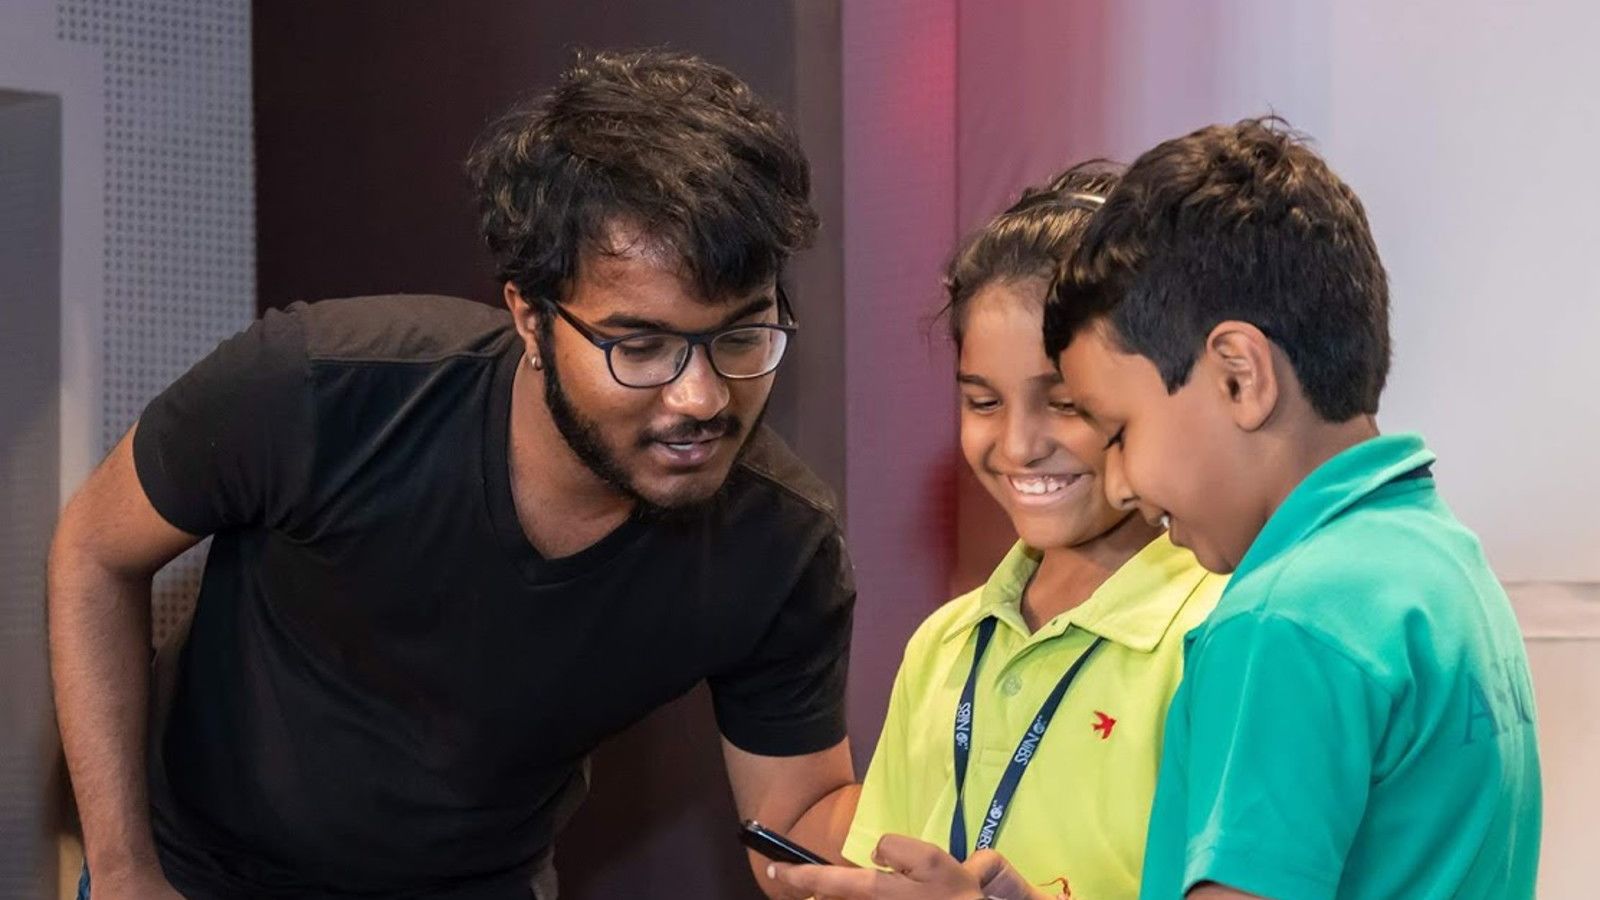 Bhanu does the math with two aspiring aspiring young mathematicians.